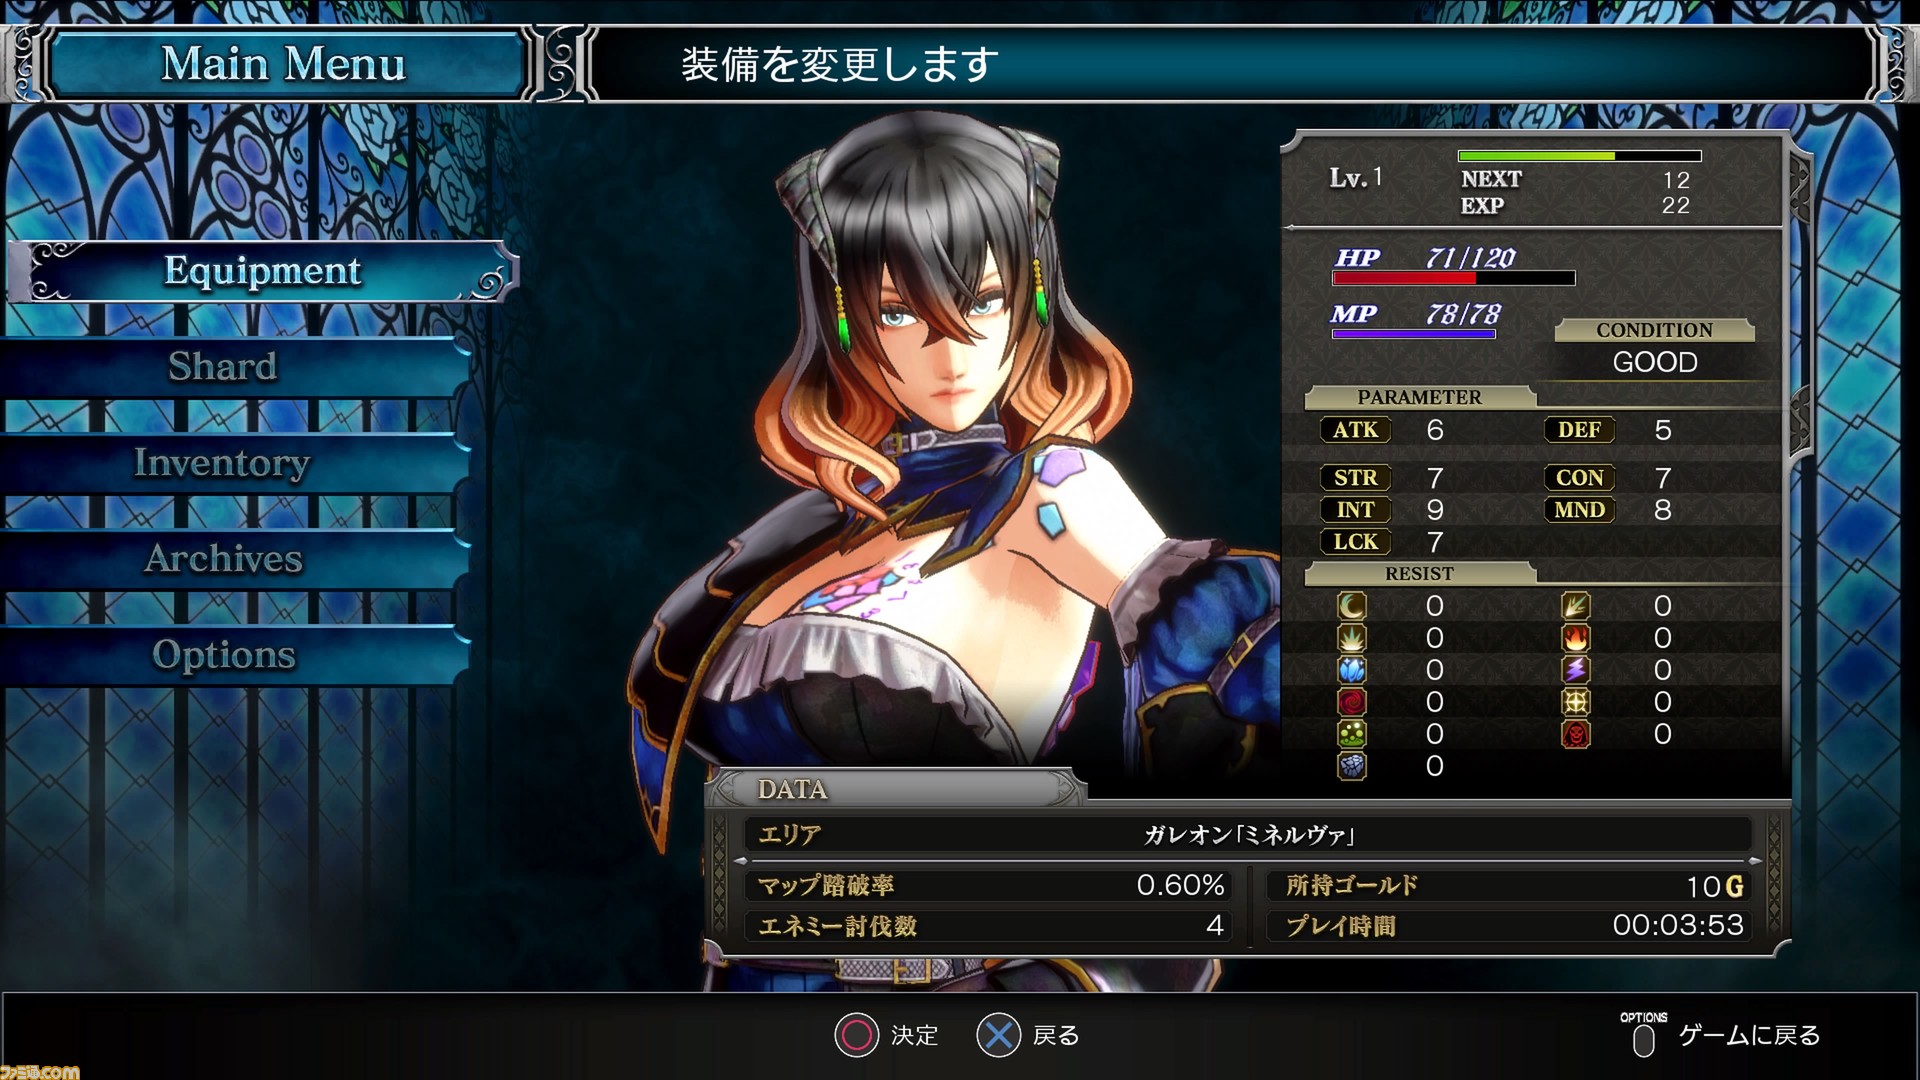 Bloodstained: Ritual of the Night,ブラッドステインド：リチュアル・オブ・ザ・ナイト,505 Games,五十嵐孝司,NS,PS4,,GSE,